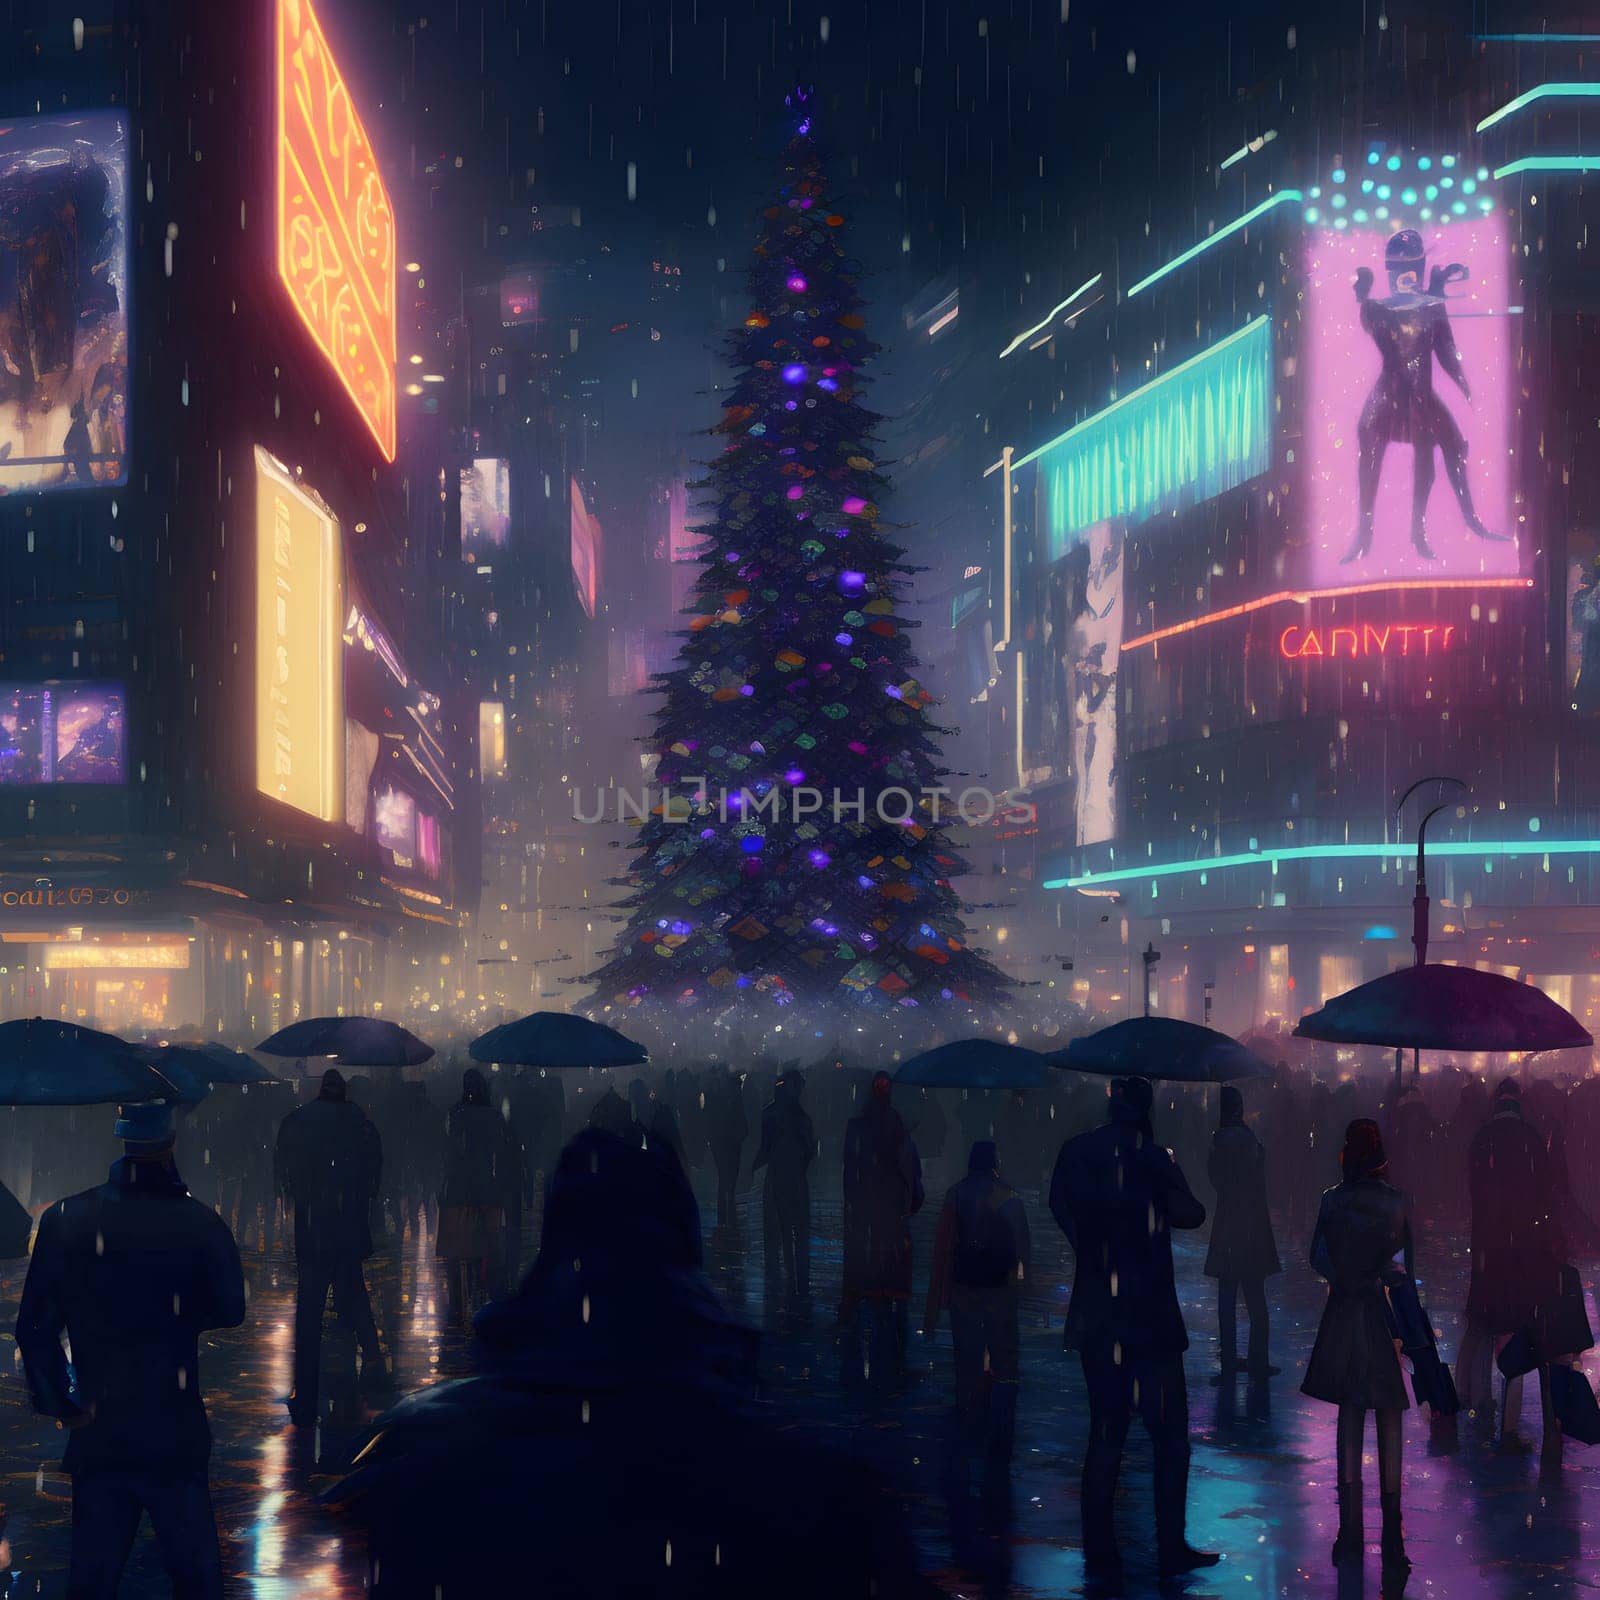 cyberpunk neon illuminated city street at christmas night with crowd of people and large xmas tree, neural network ai generated art by z1b